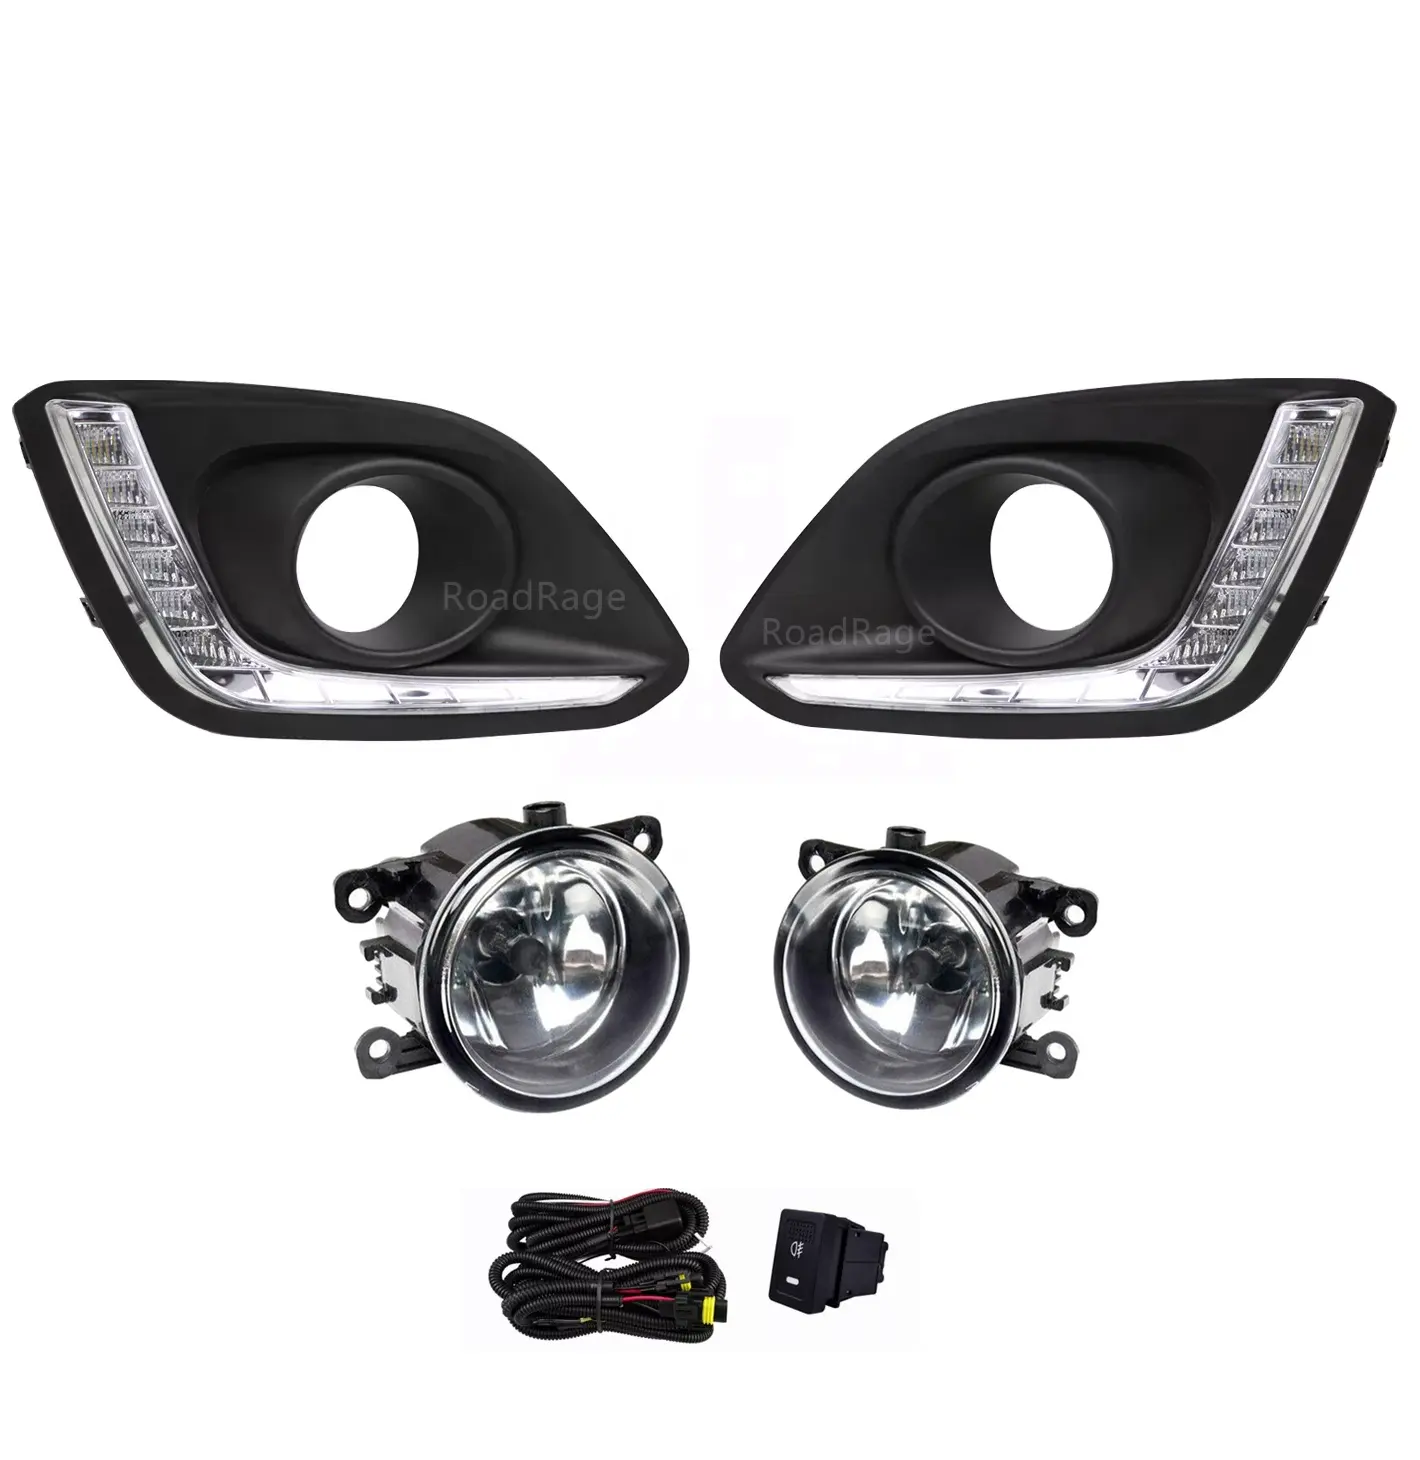 Replacement bezel Cover LED Daytime Running Lights Car DRL Driving fog lamp for Suzuki Swift 2013 2014 2015 2016